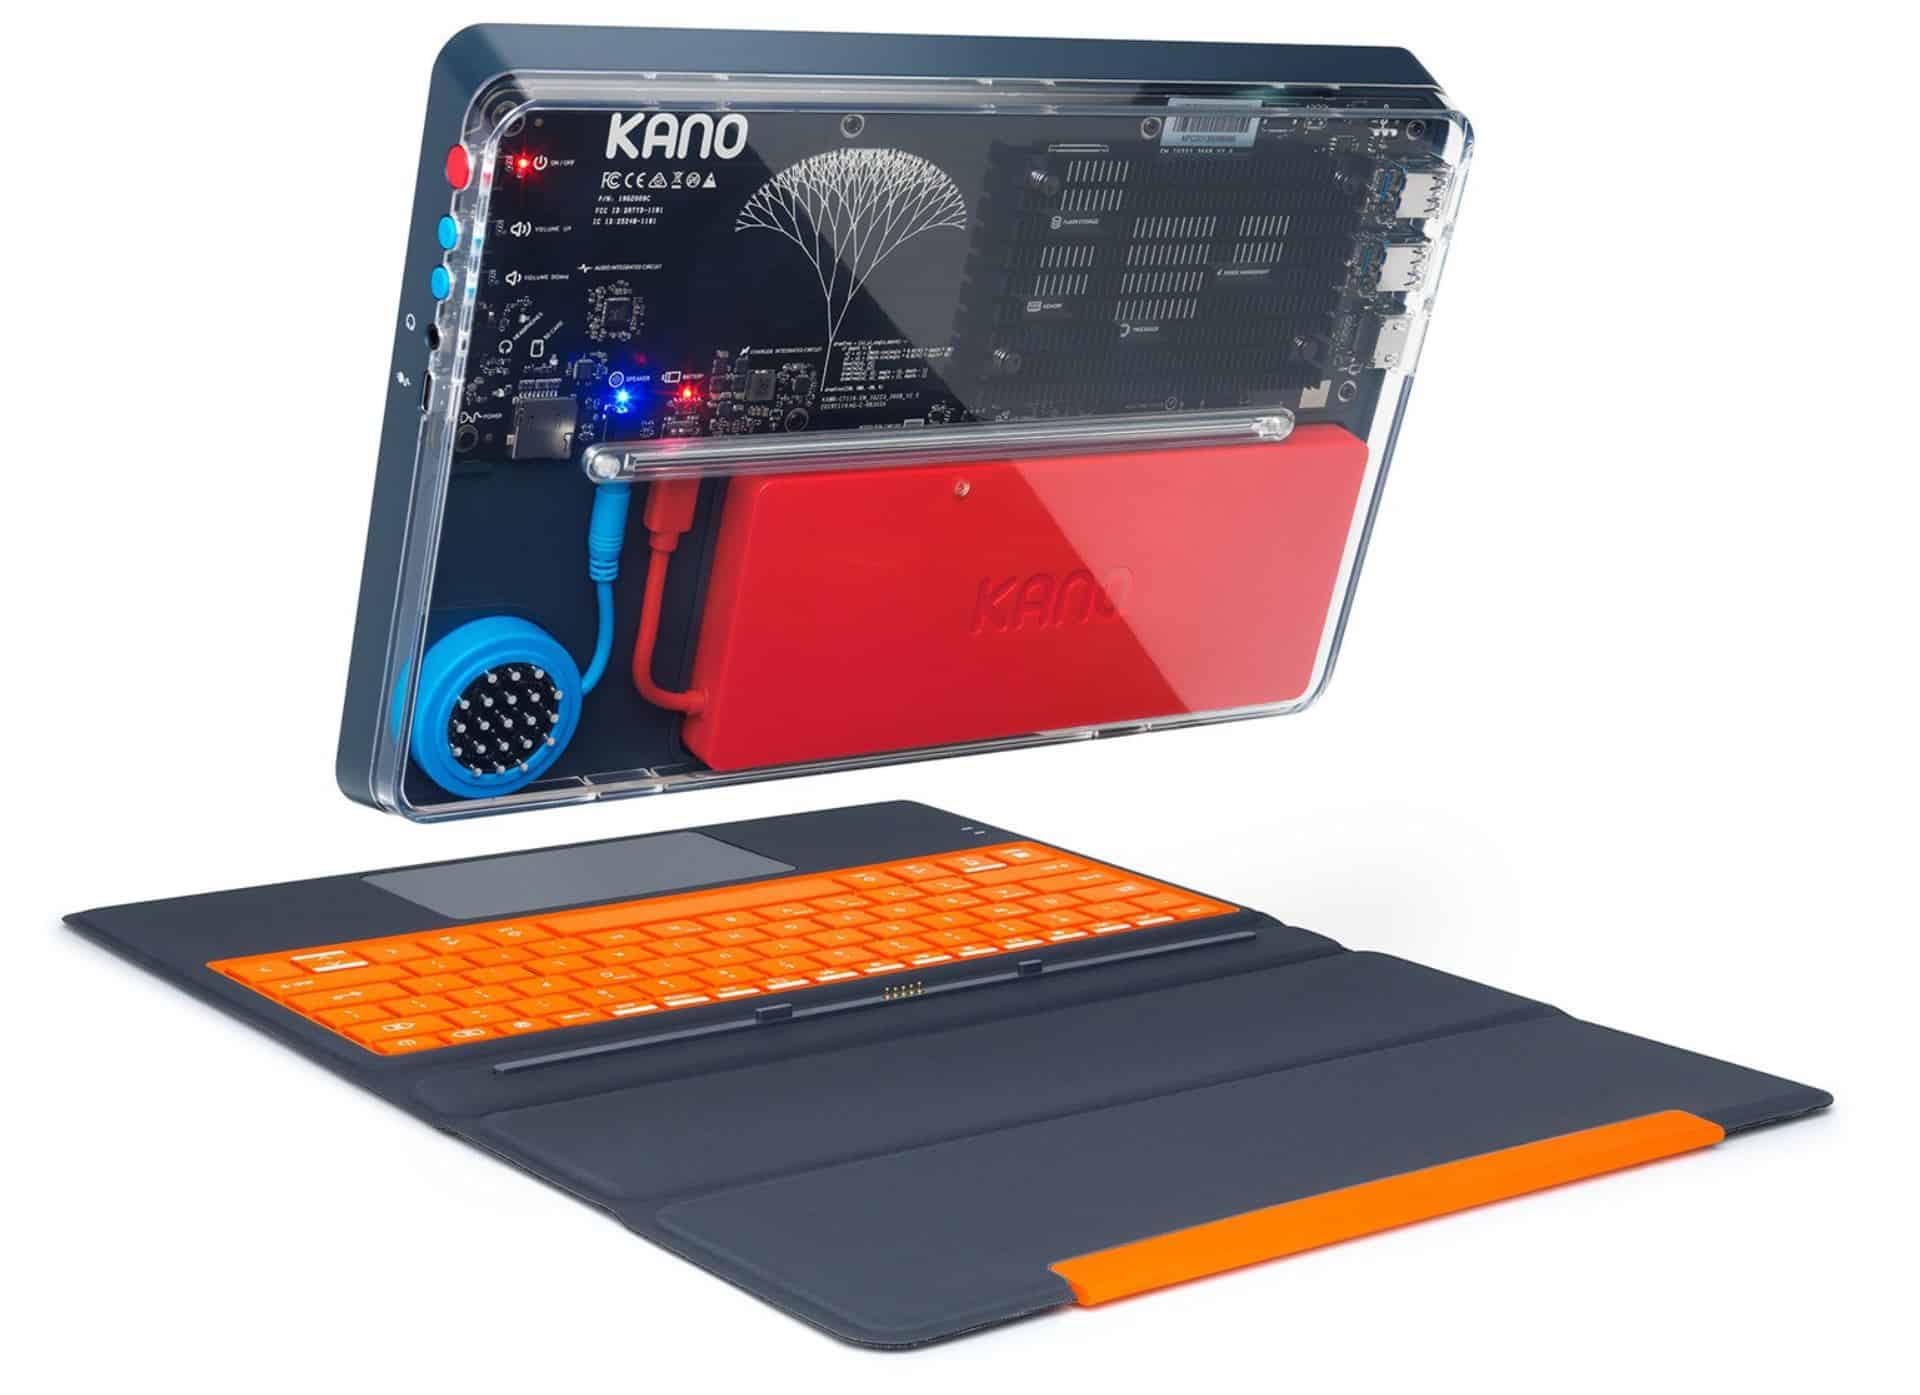 Microsoft invests in Kano, a company that makes buildable laptops for school kids